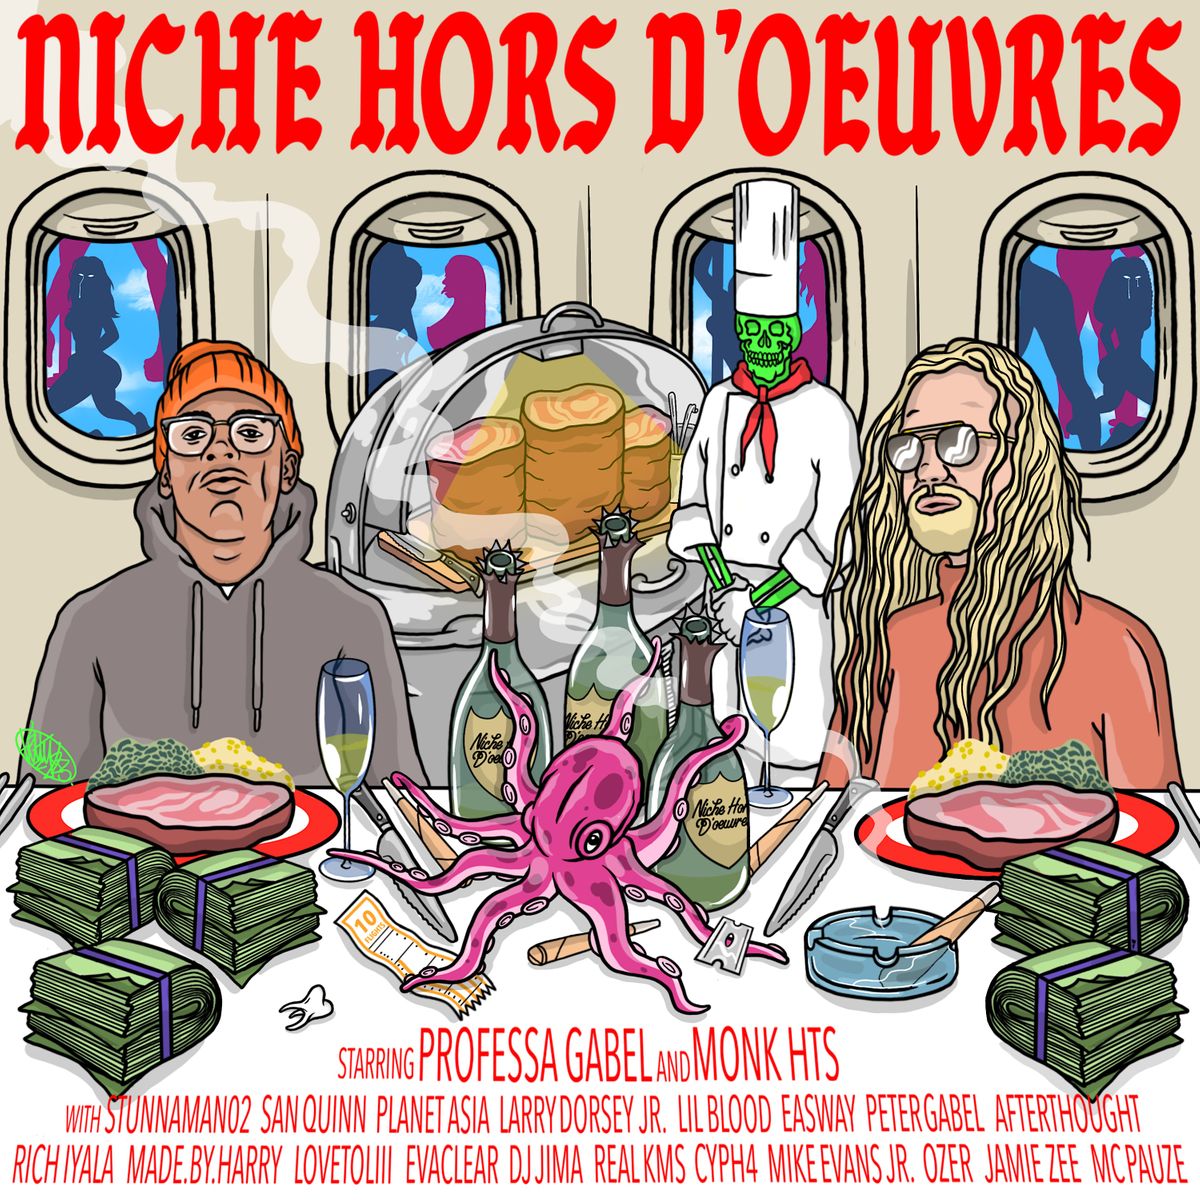 "Niche Hors D\u2019oeuvres" Album Listening Party and Art Gallery